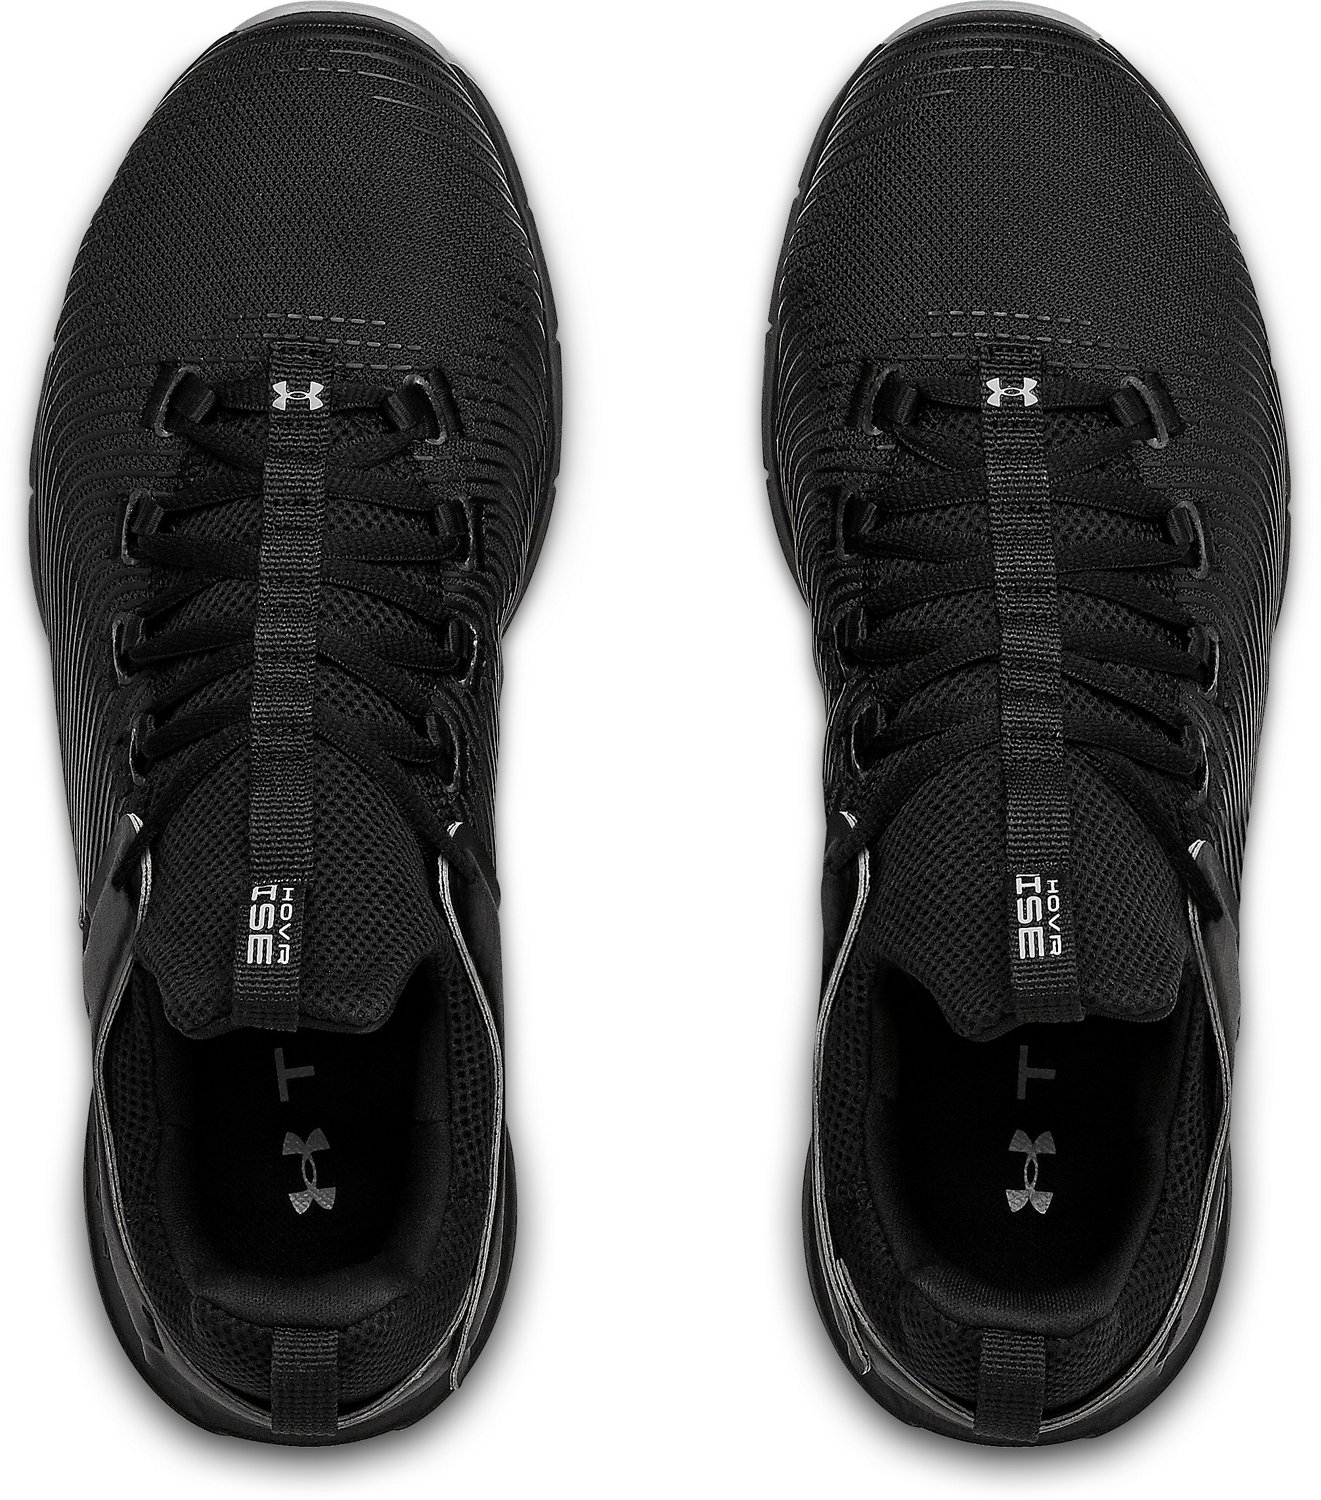 Under Armour Men's HOVR Rise 2 Training Shoes | Academy